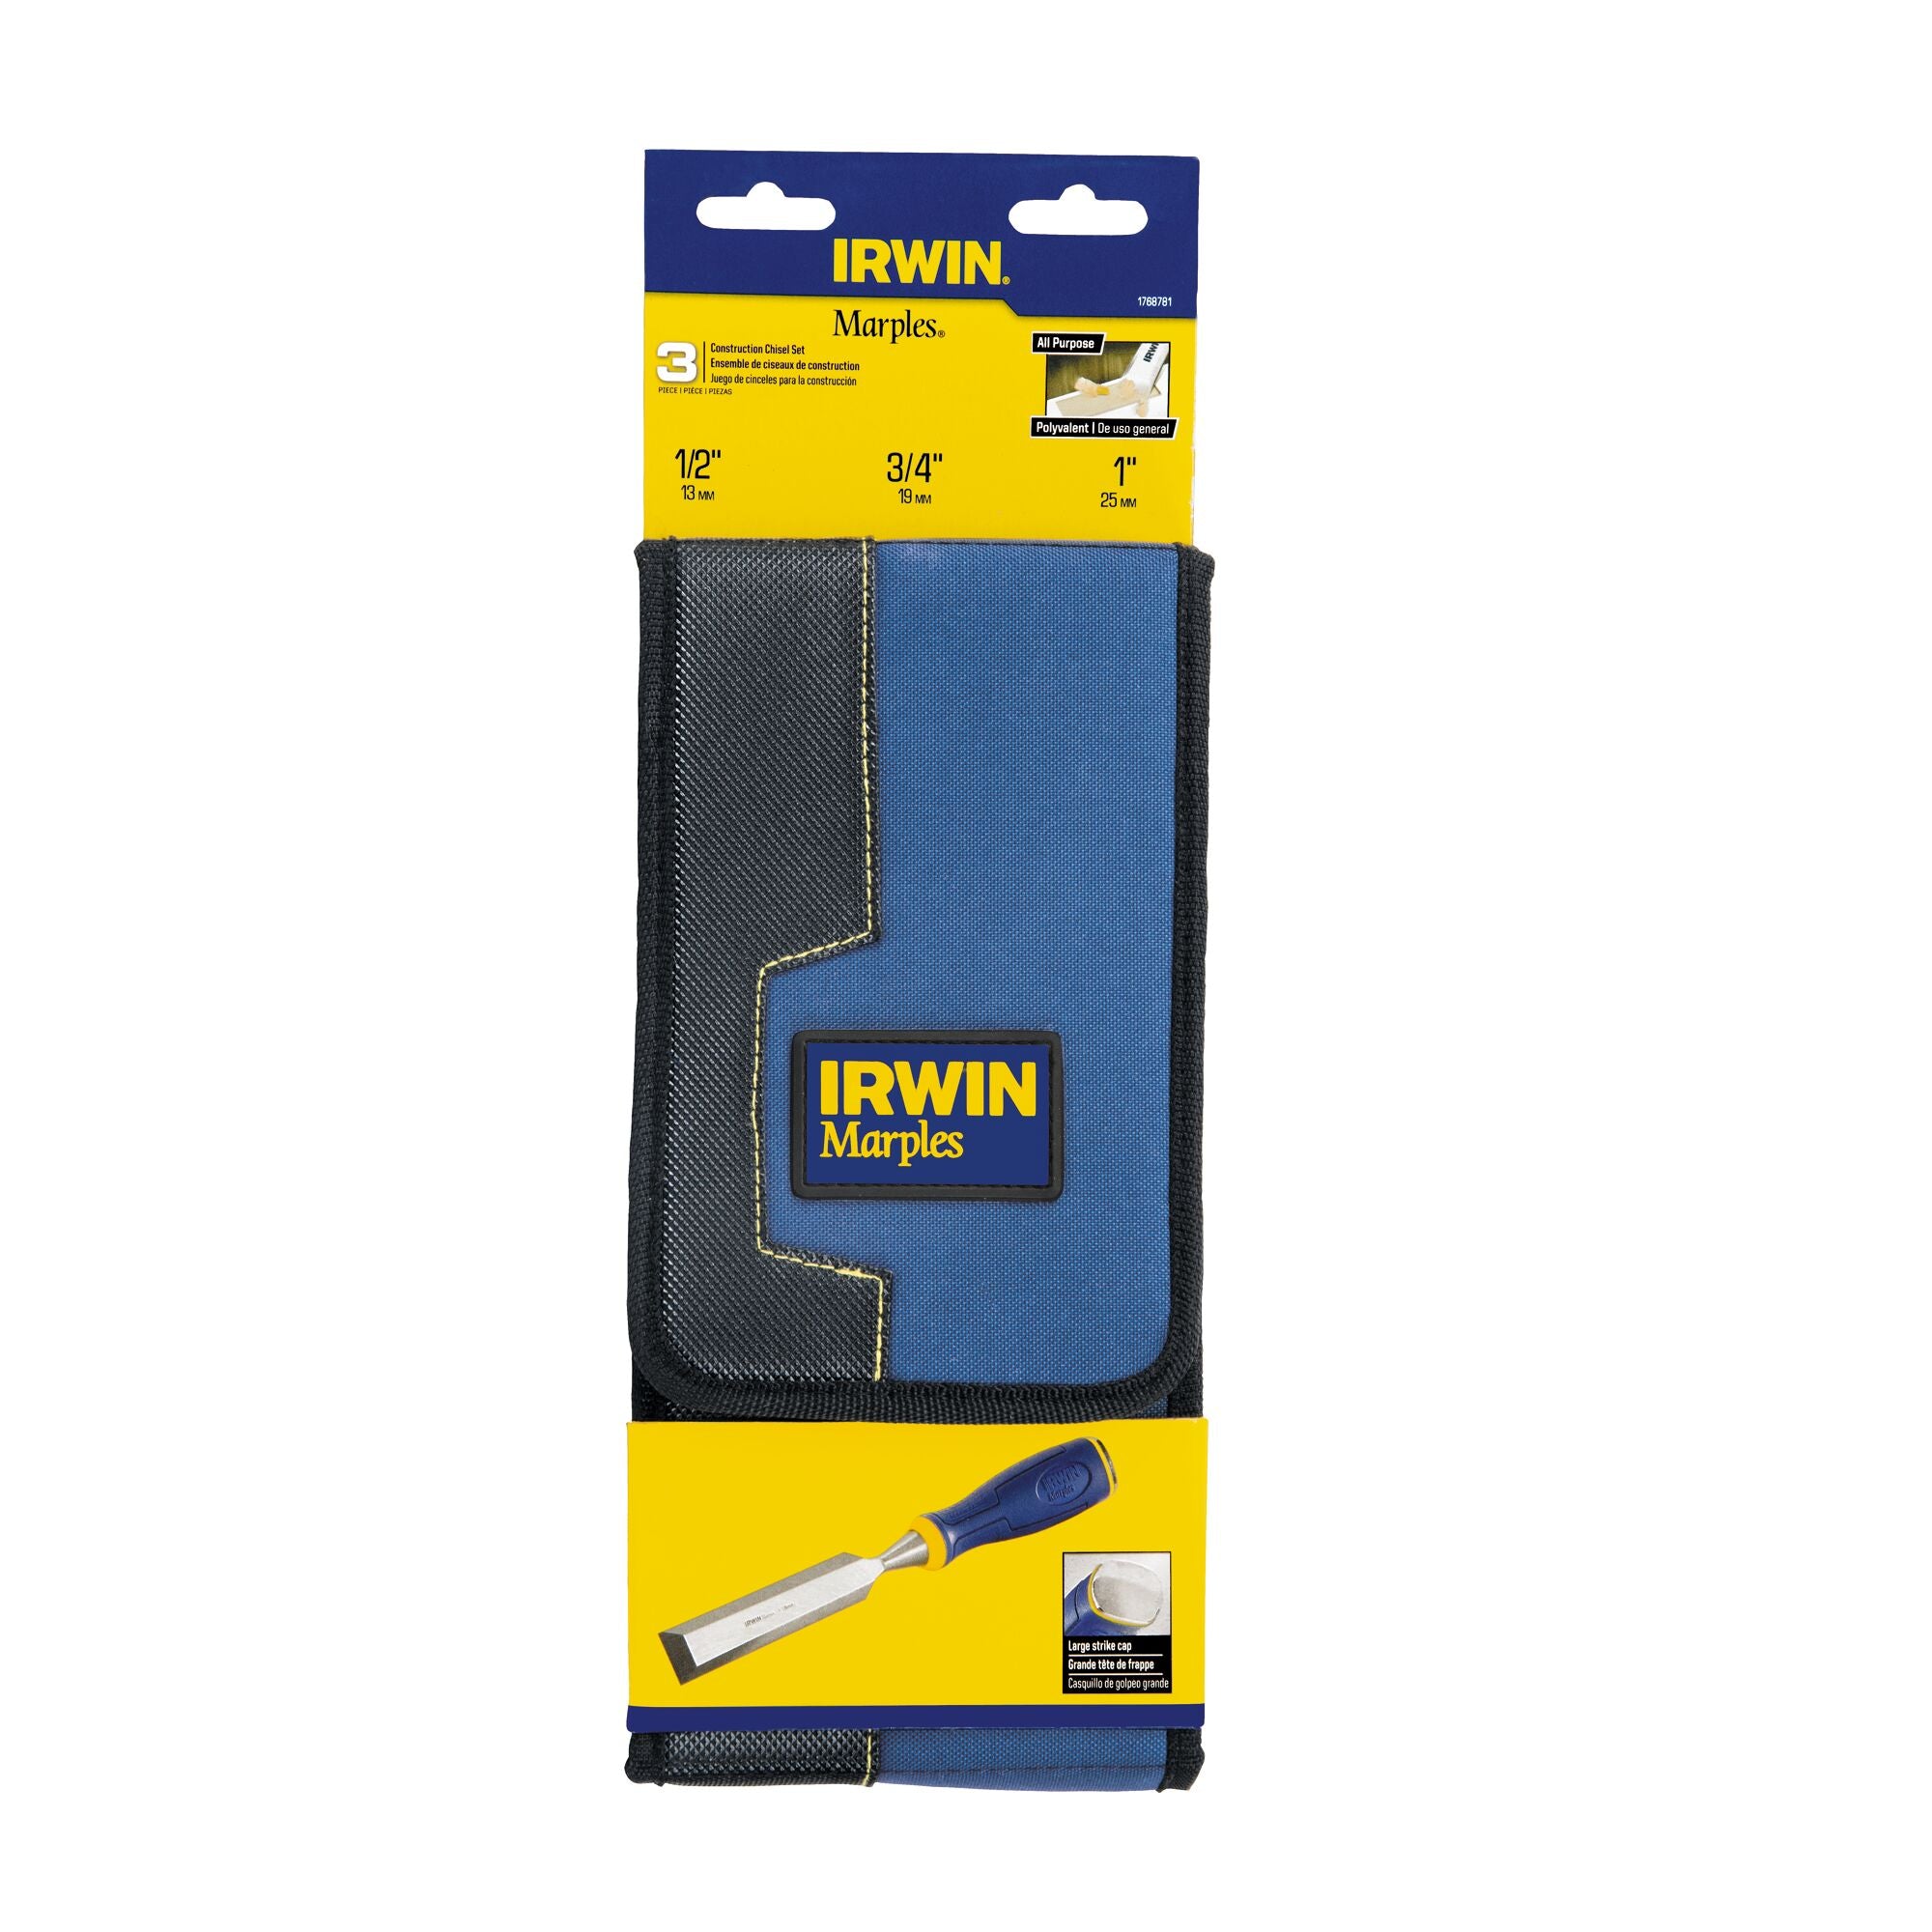 3 Piece Chisel Set With Wallet (1/2", 3/4", 1")